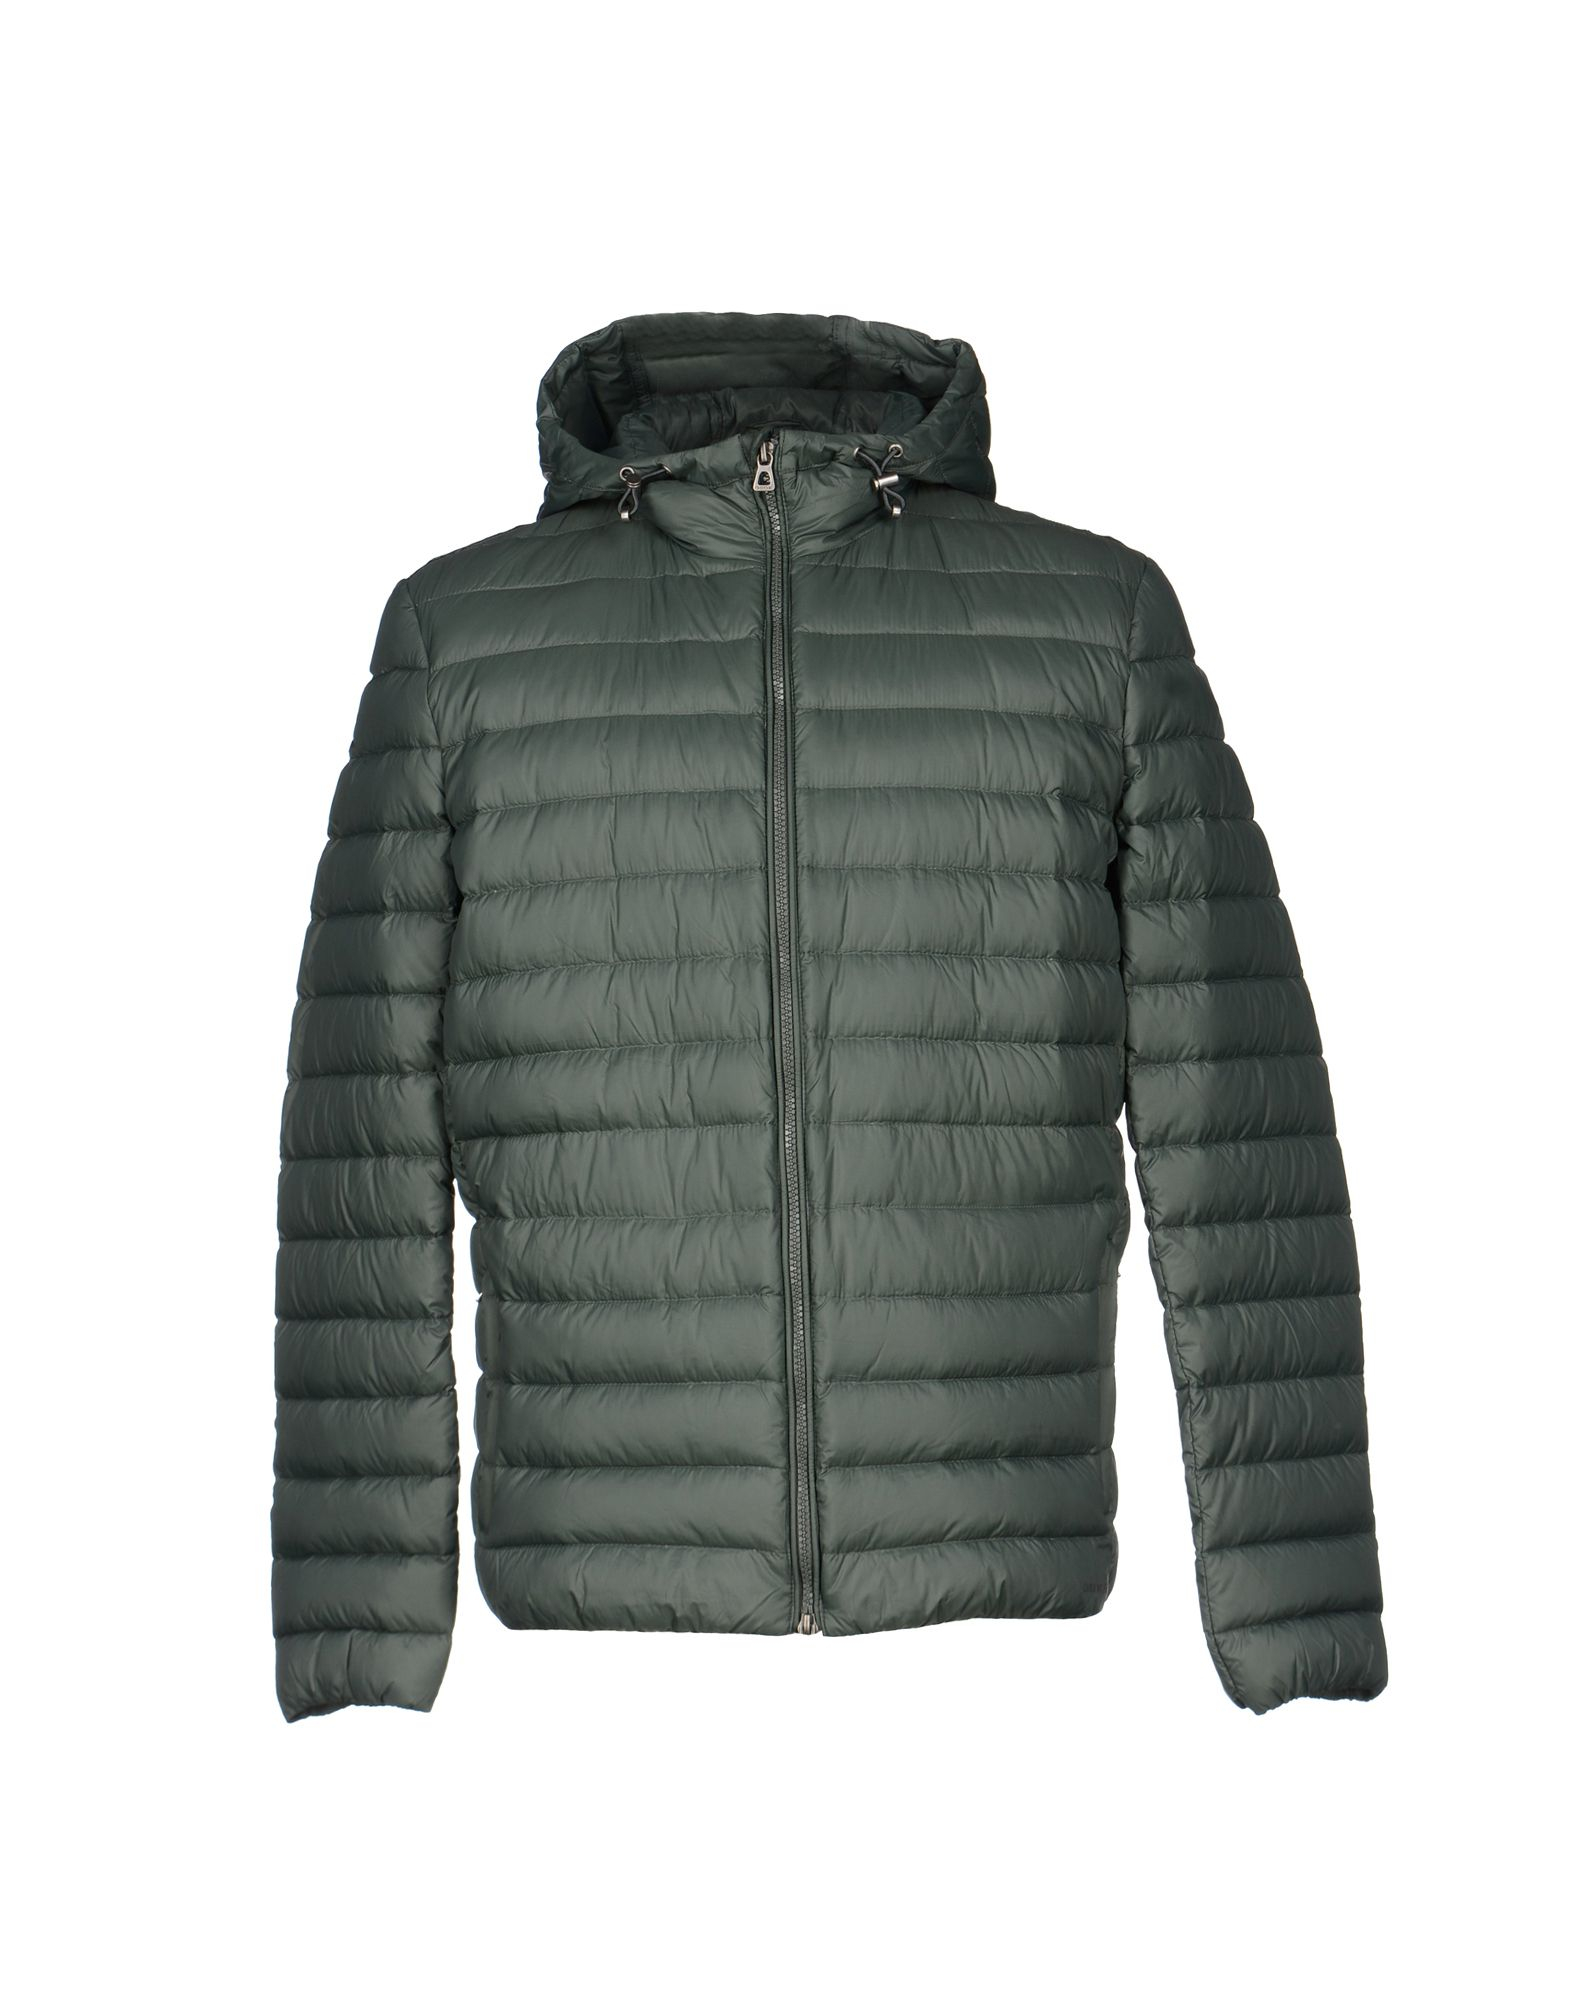 Geox Down Jacket in Military Green (Green) for Men - Lyst